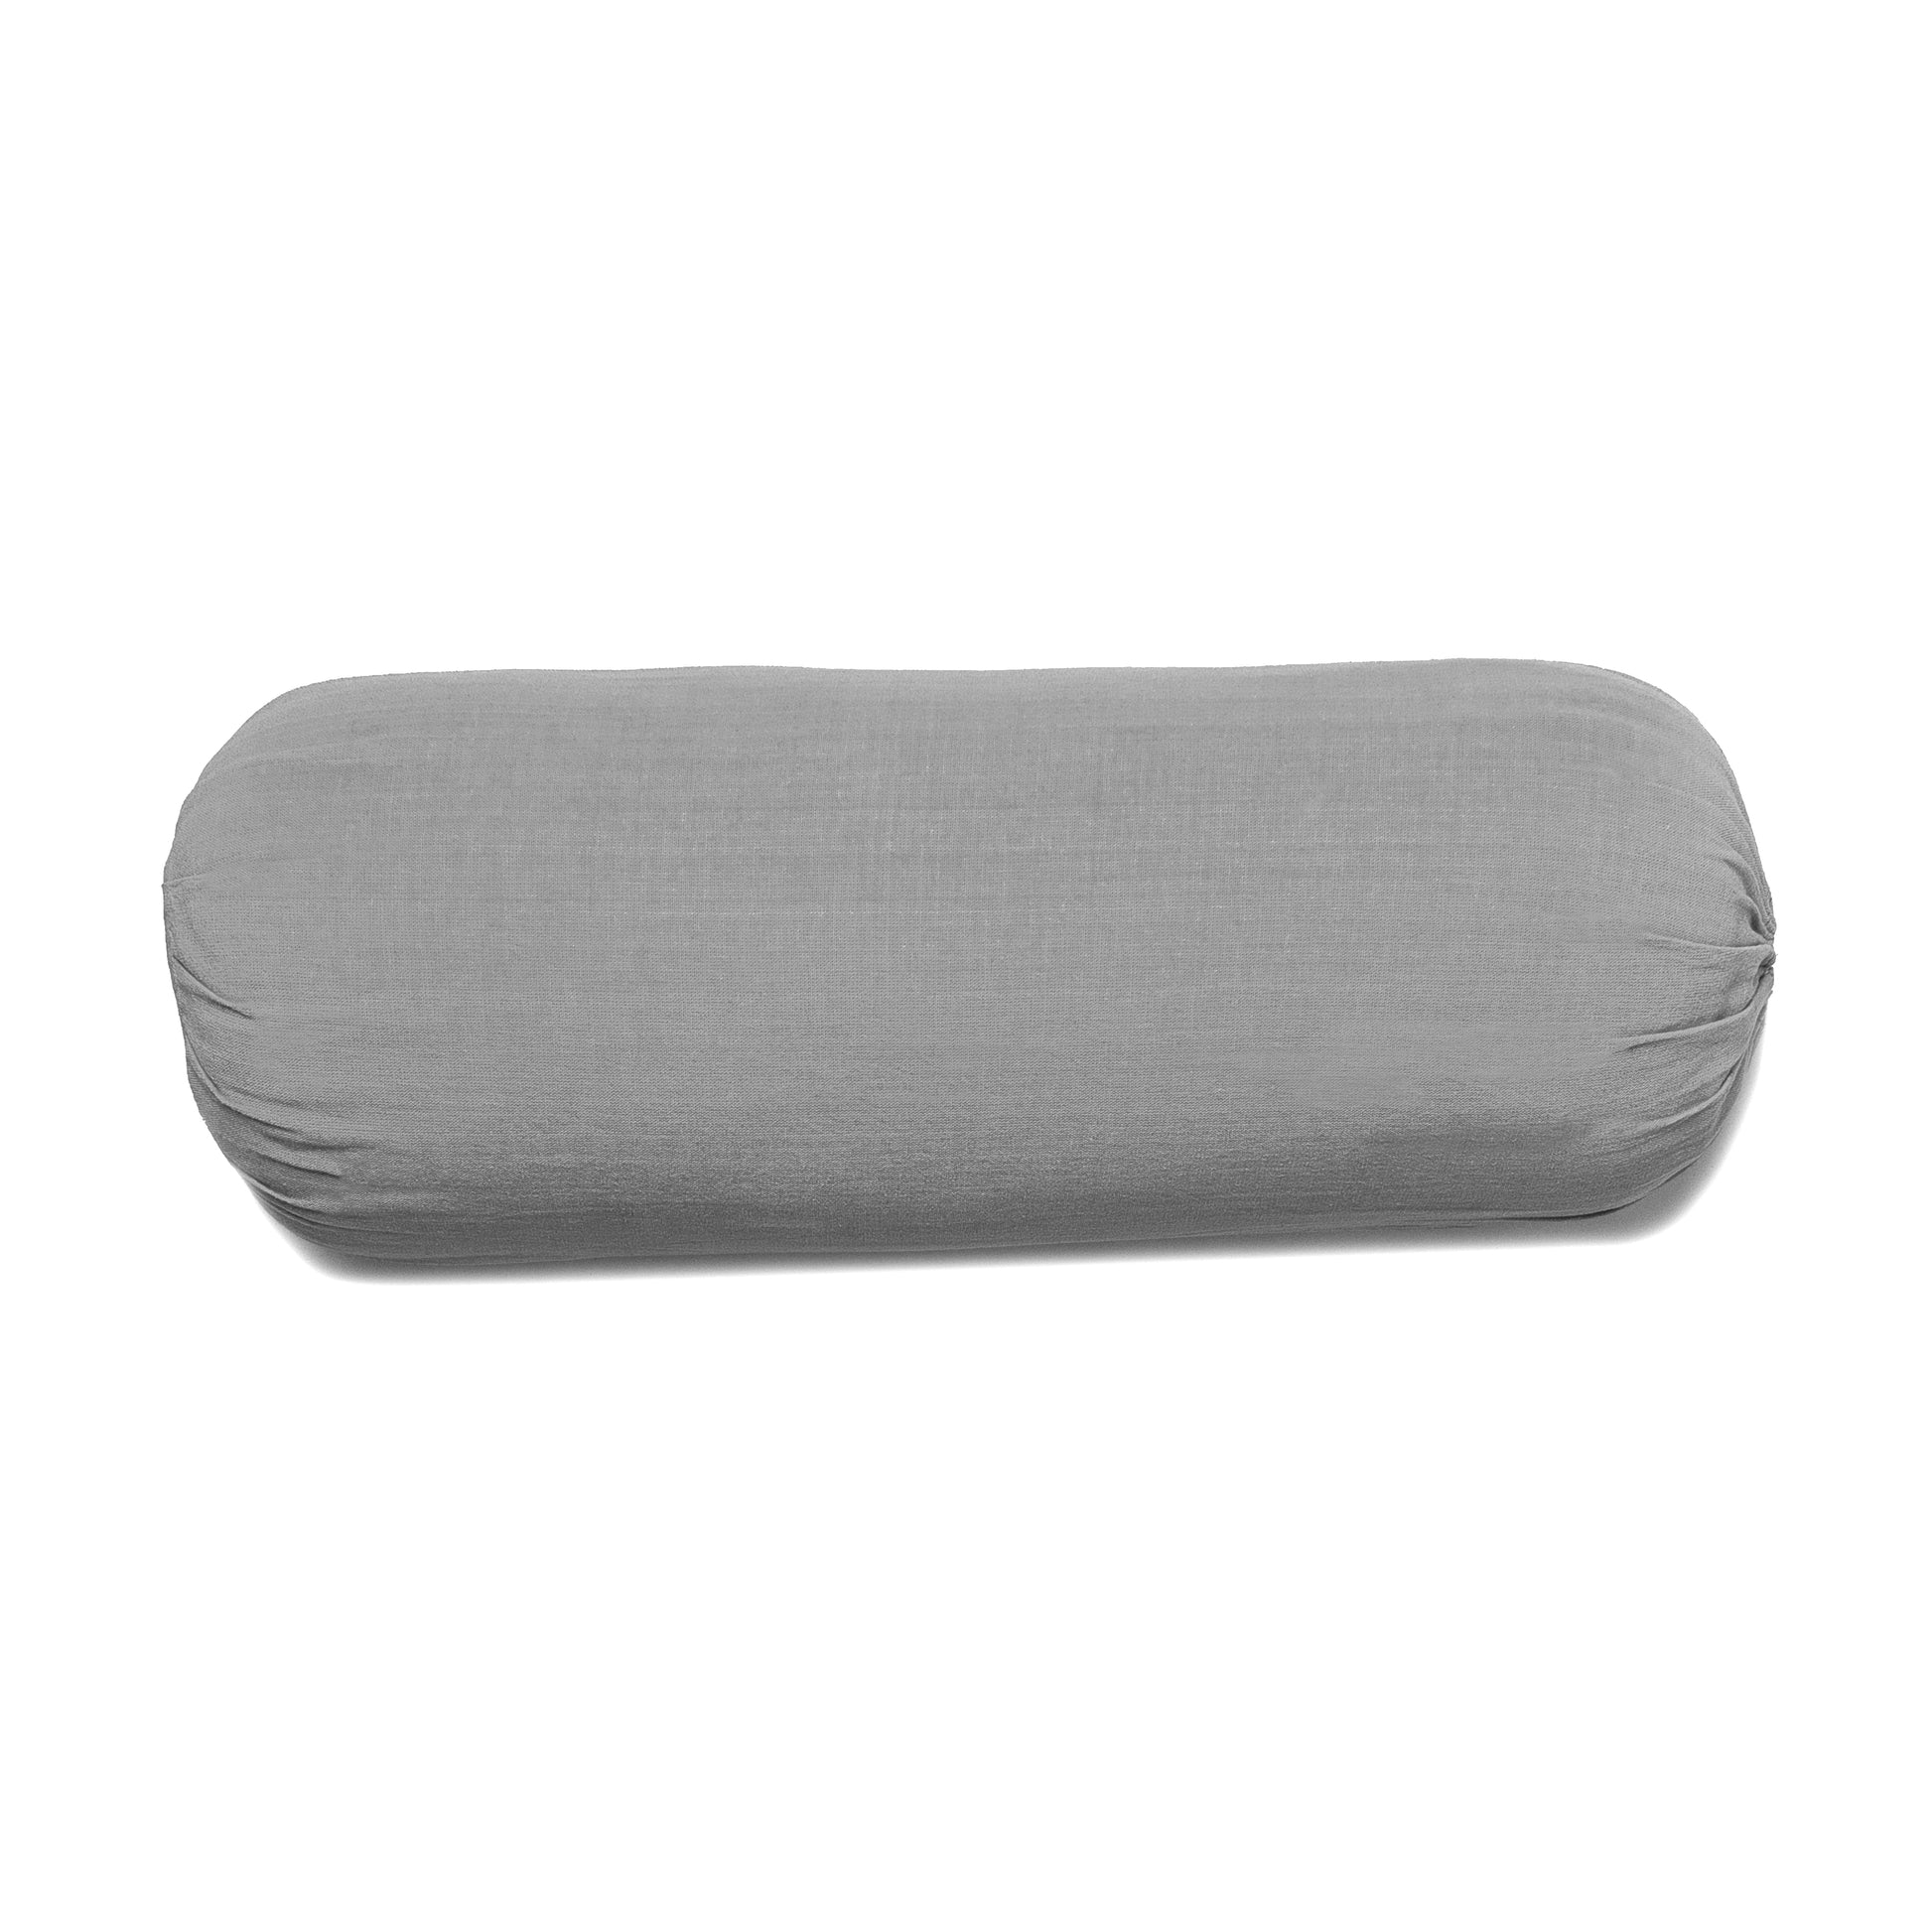 Experience Ultimate Comfort in Your Yoga Practice With Our Cotton, bolster  yoga